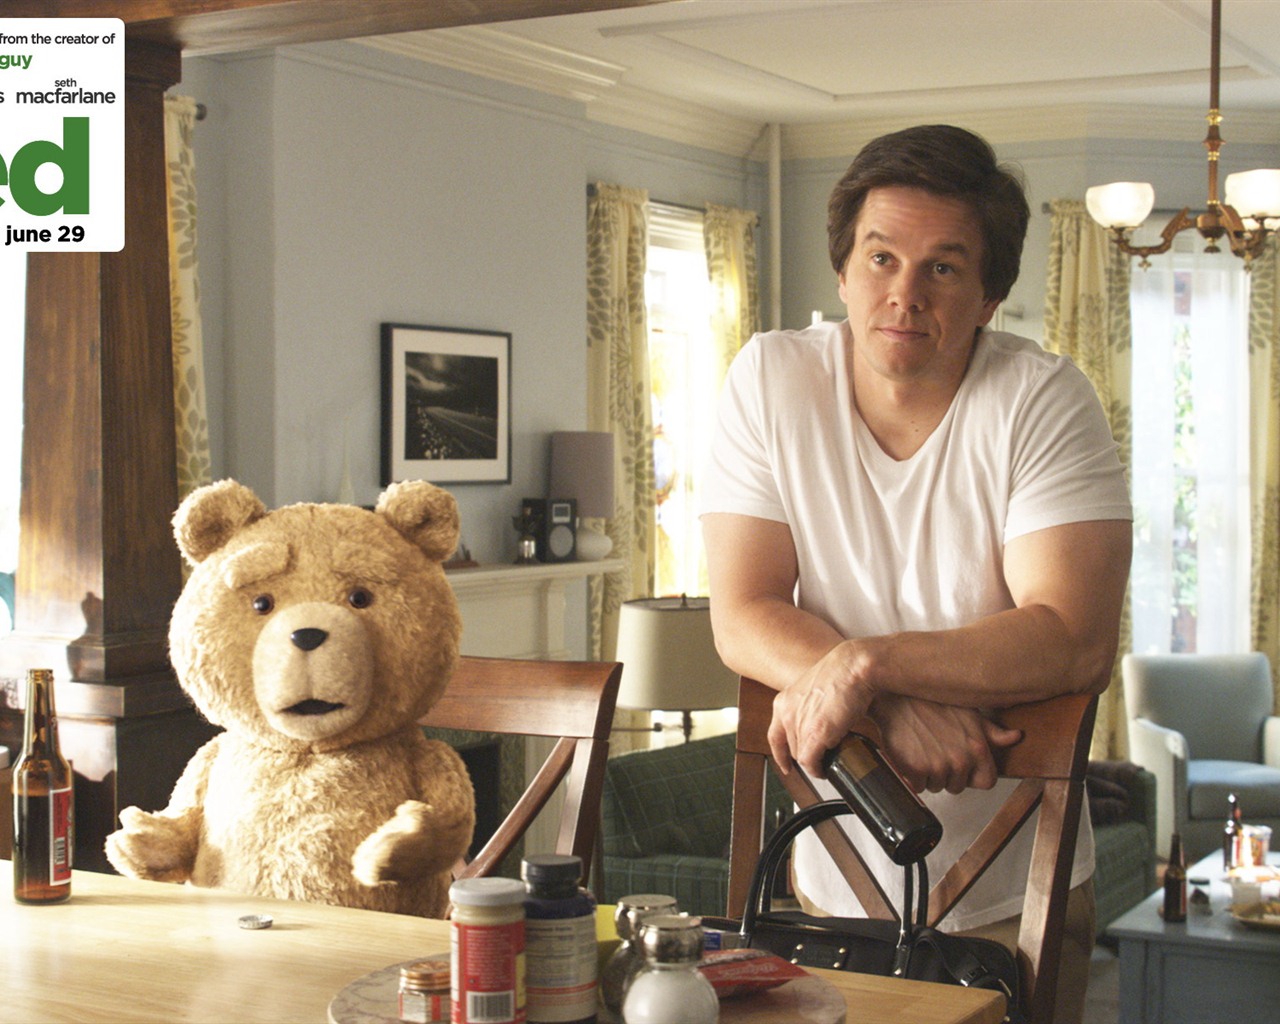 Ted 2012 HD movie wallpapers #3 - 1280x1024